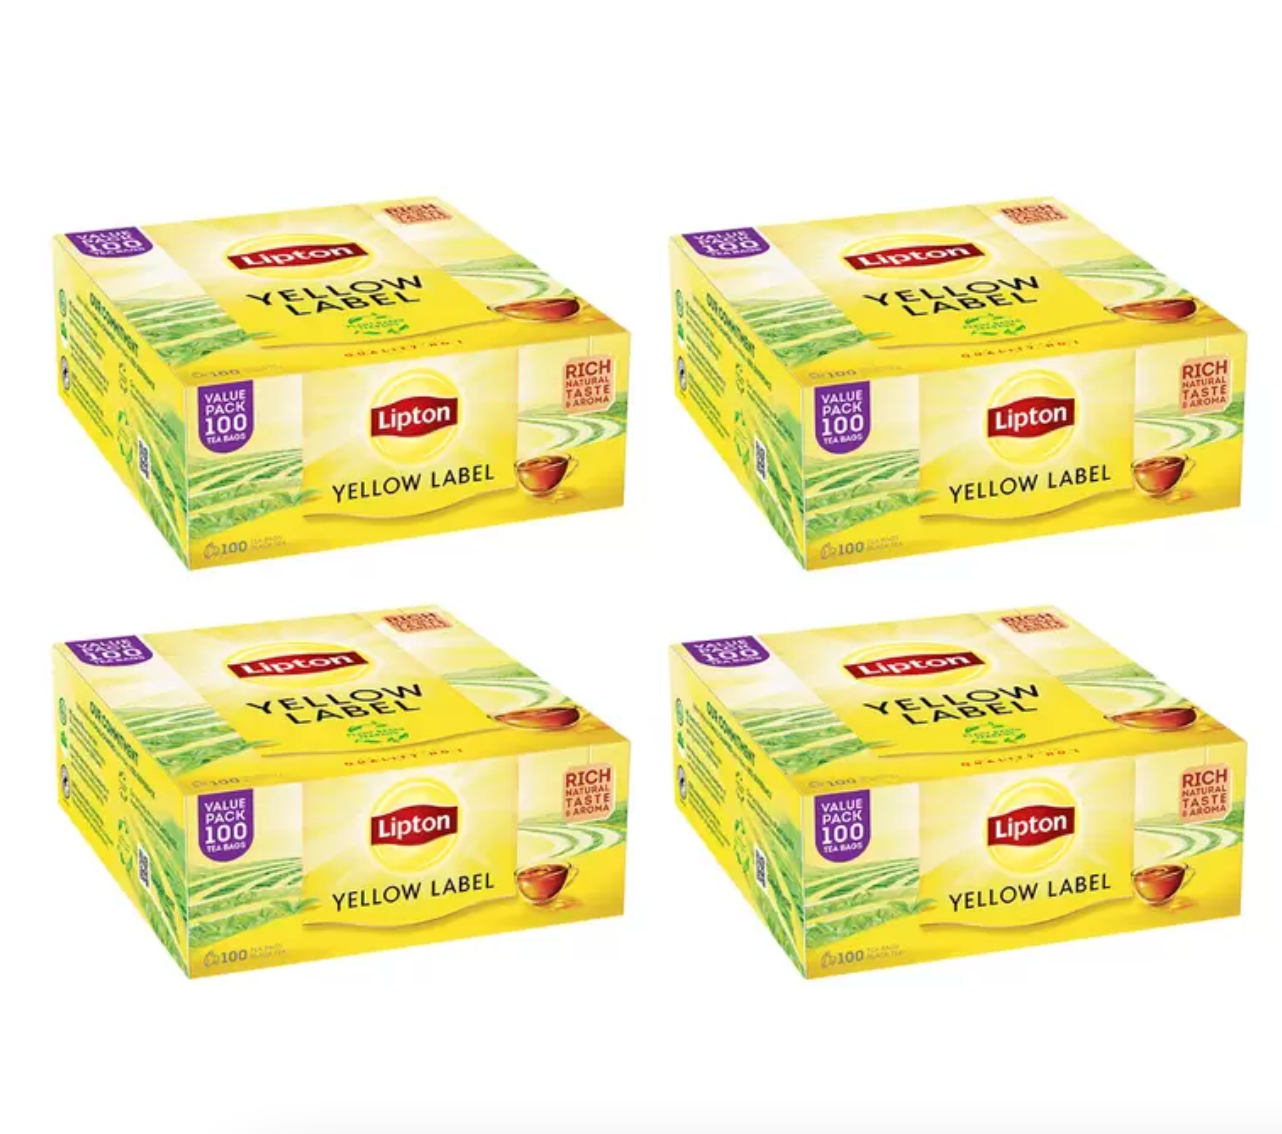 Lipton Yellow Label Tea Bags, 4 x 100 Pack - Savour the Perfect Cuppa